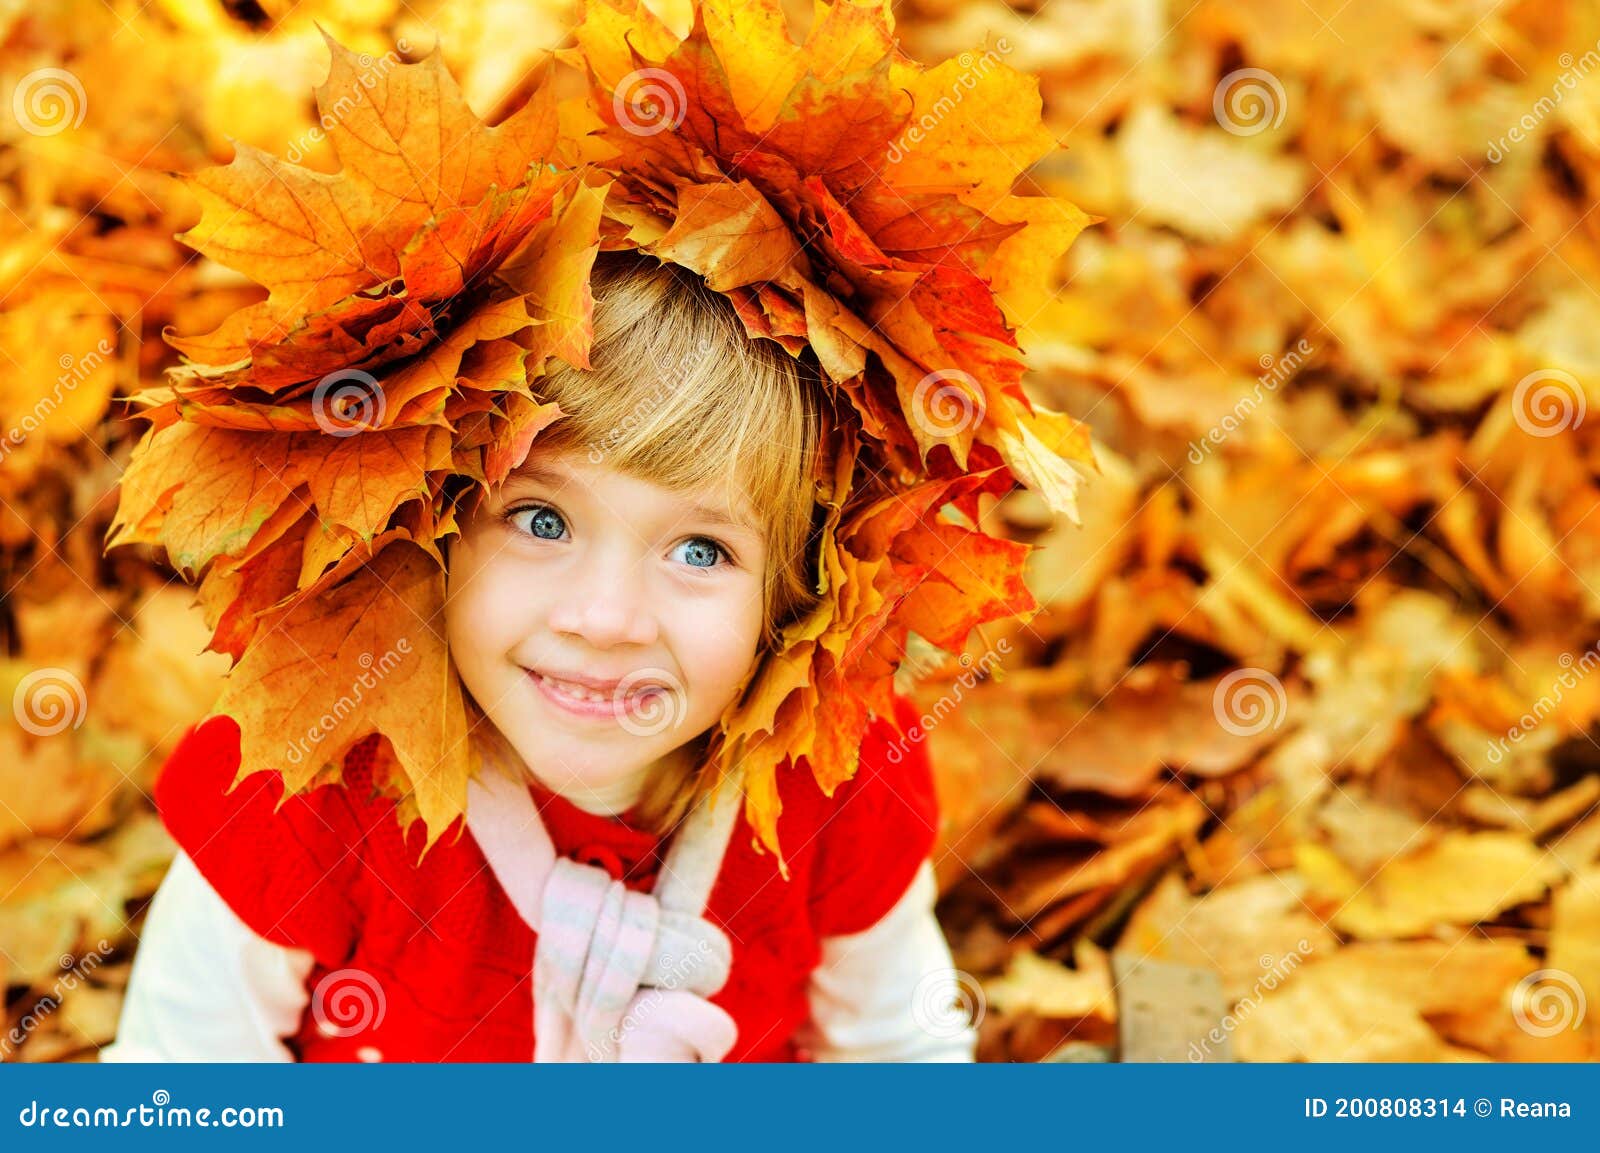 Little Girl Outdoors in Fall Stock Photo - Image of happiness, happy ...